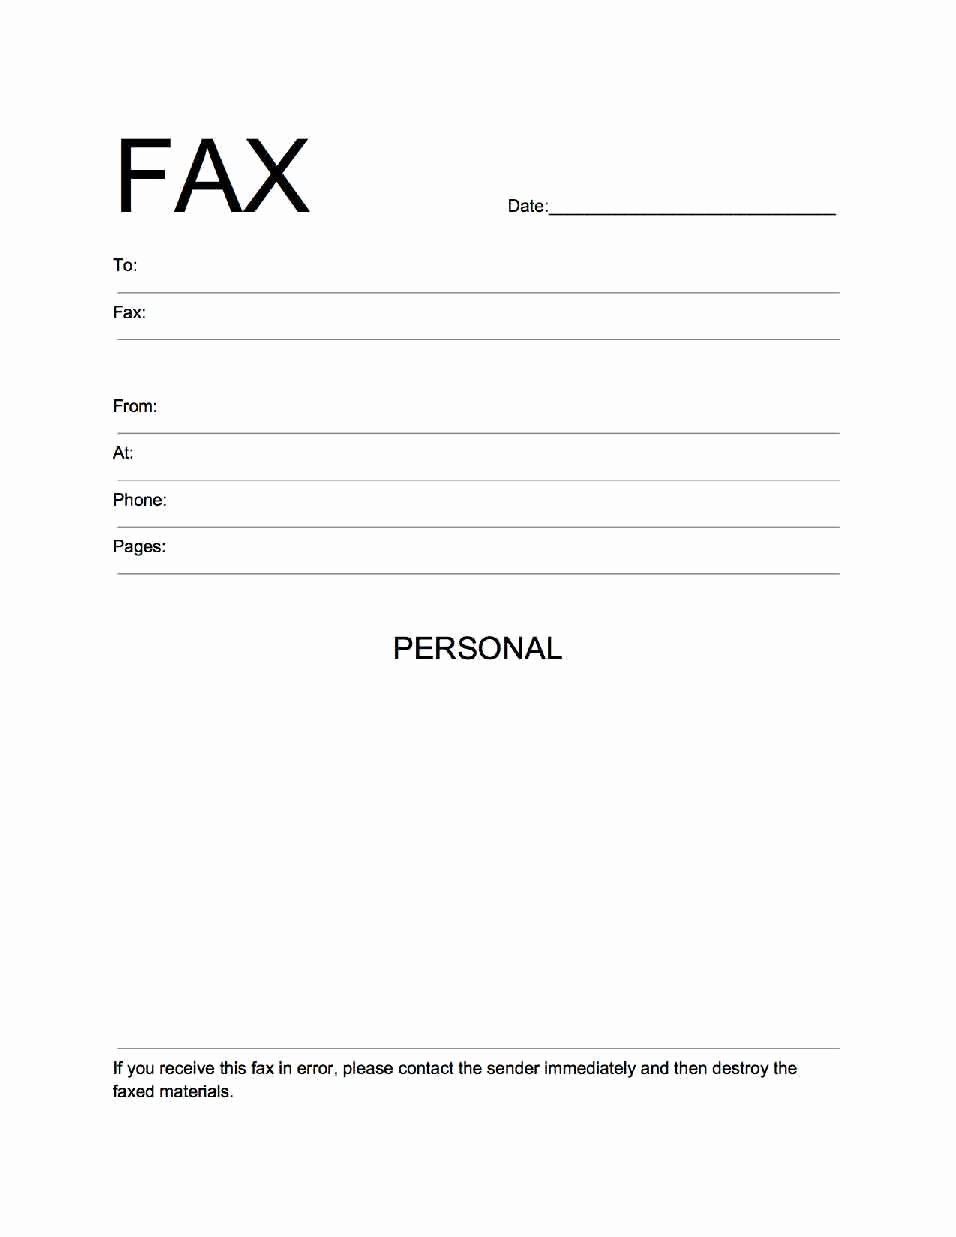 Sample Fax Cover Sheets Luxury Fax Cover Sheet Pdf Excel &amp; Word